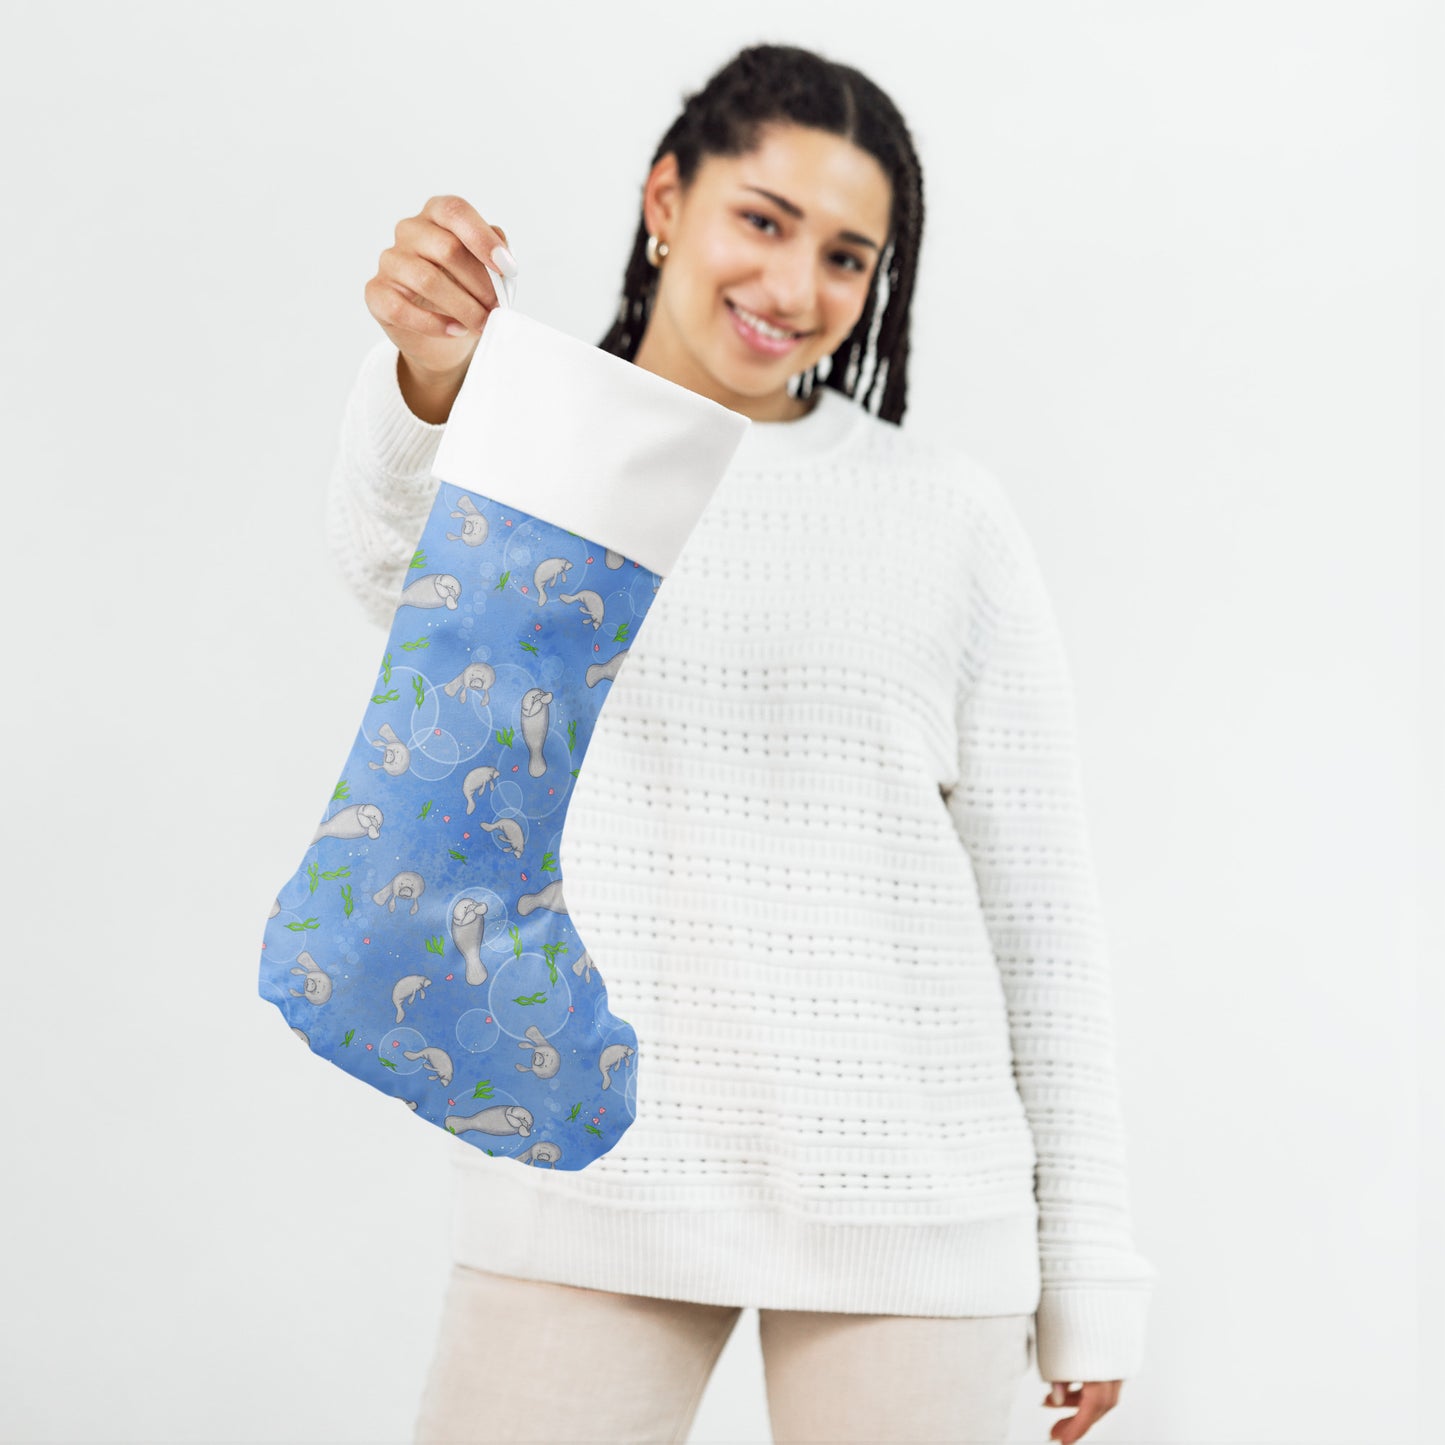 Limited Edition Manatee Christmas Stocking.  7 by 18 inches. The front has a hand-illustrated manatee design with an off-white polyester fabric on the back. It has a white fold-over cuff and a loop for hanging. Shown being held by female model.